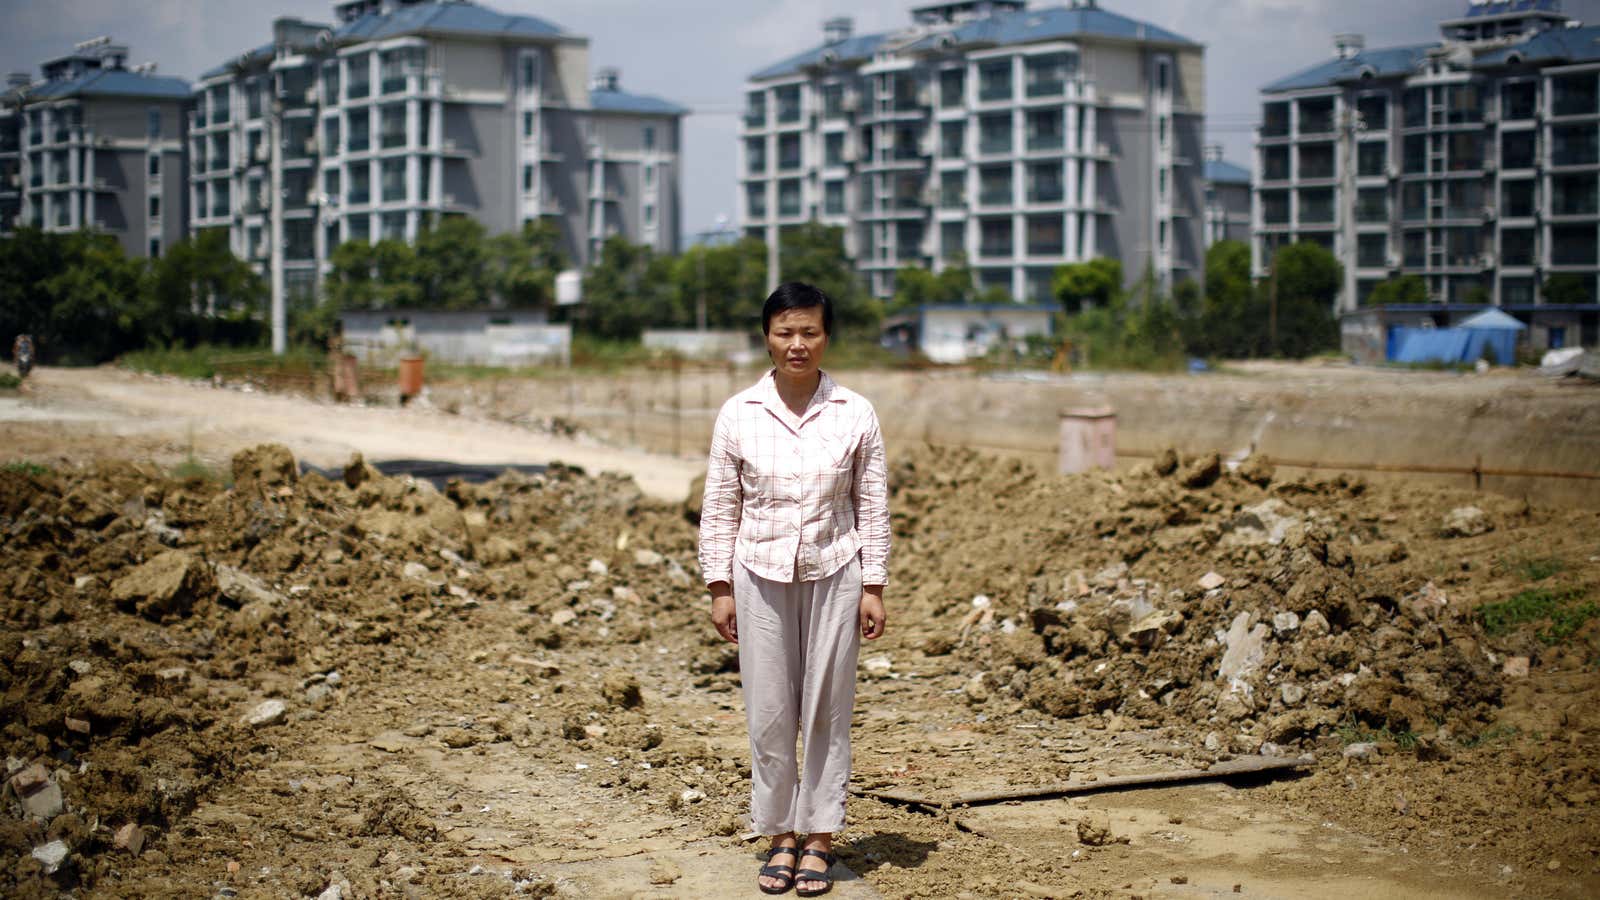 18 kidnappings later, Xu Haifeng poses where her family’s house once stood.